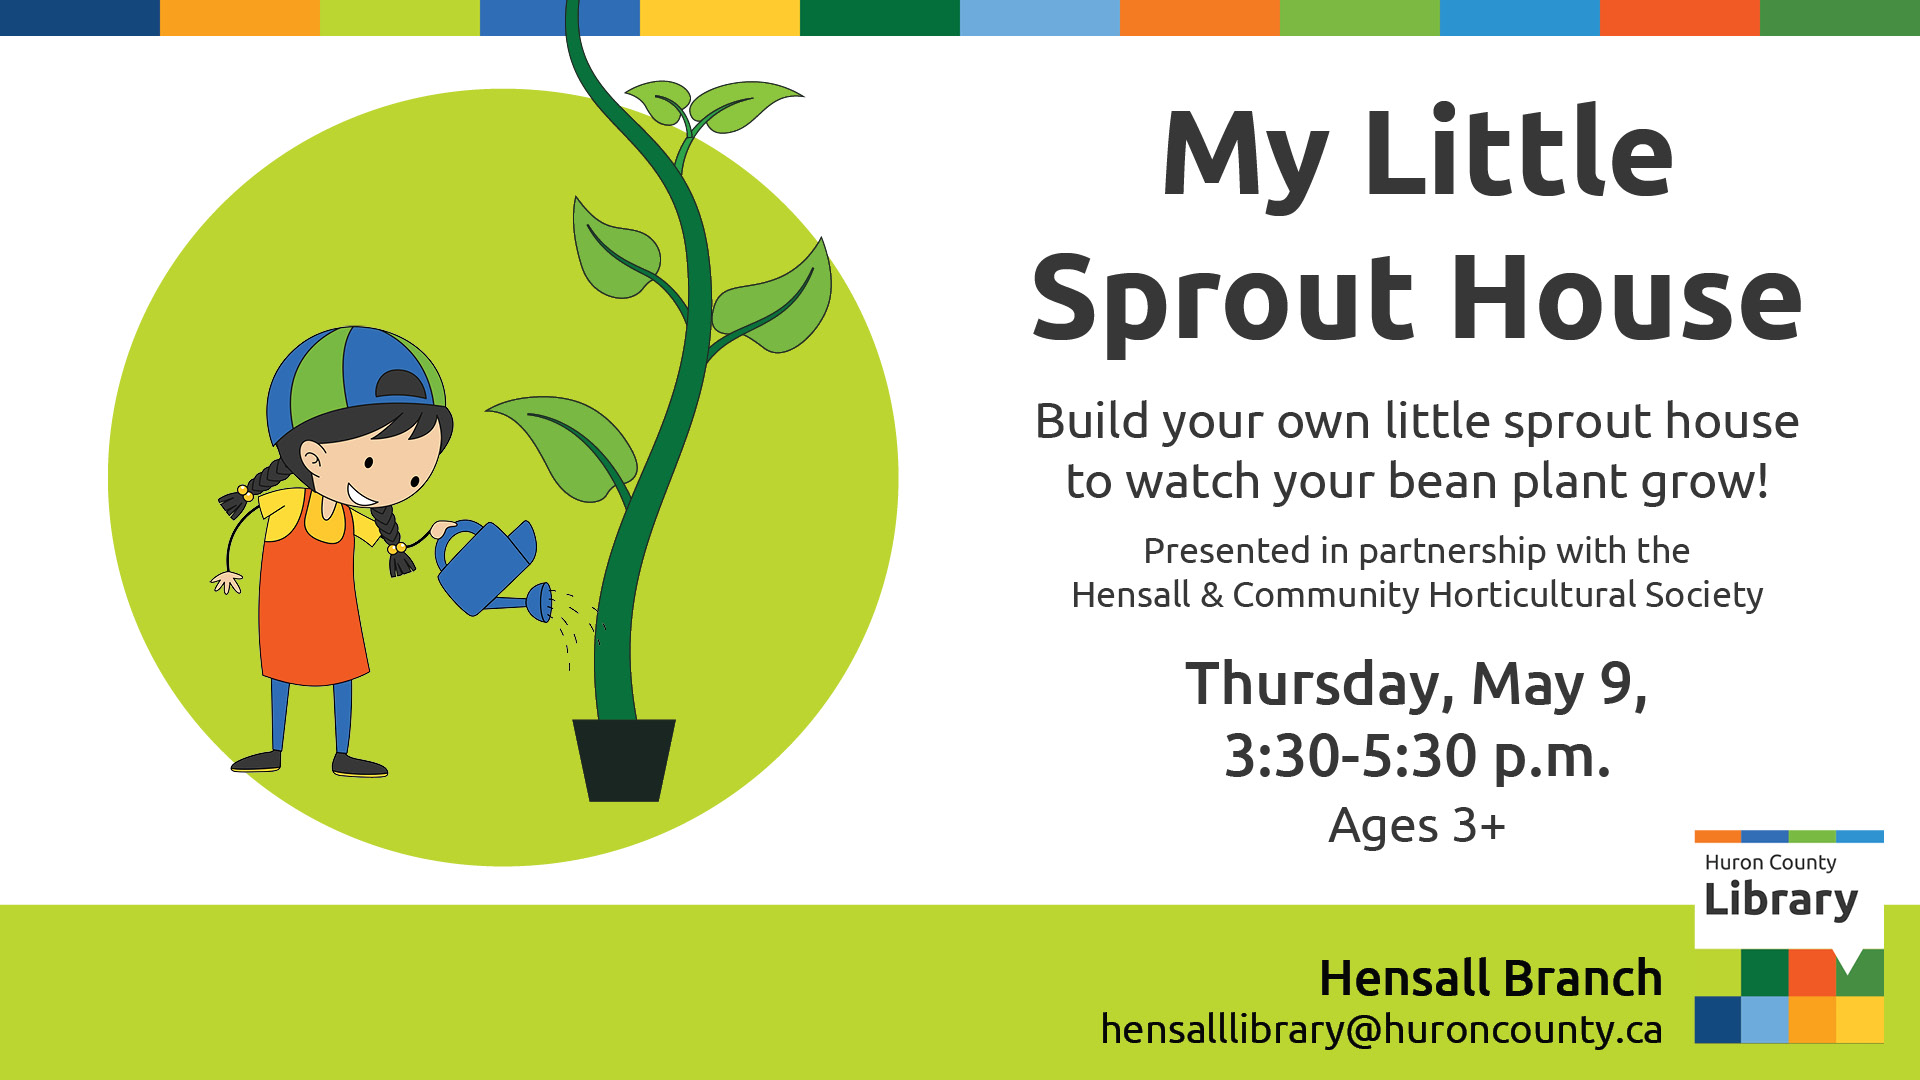 Illustration of a girl watering a bean plant with text promoting build a sprout house at Hensall